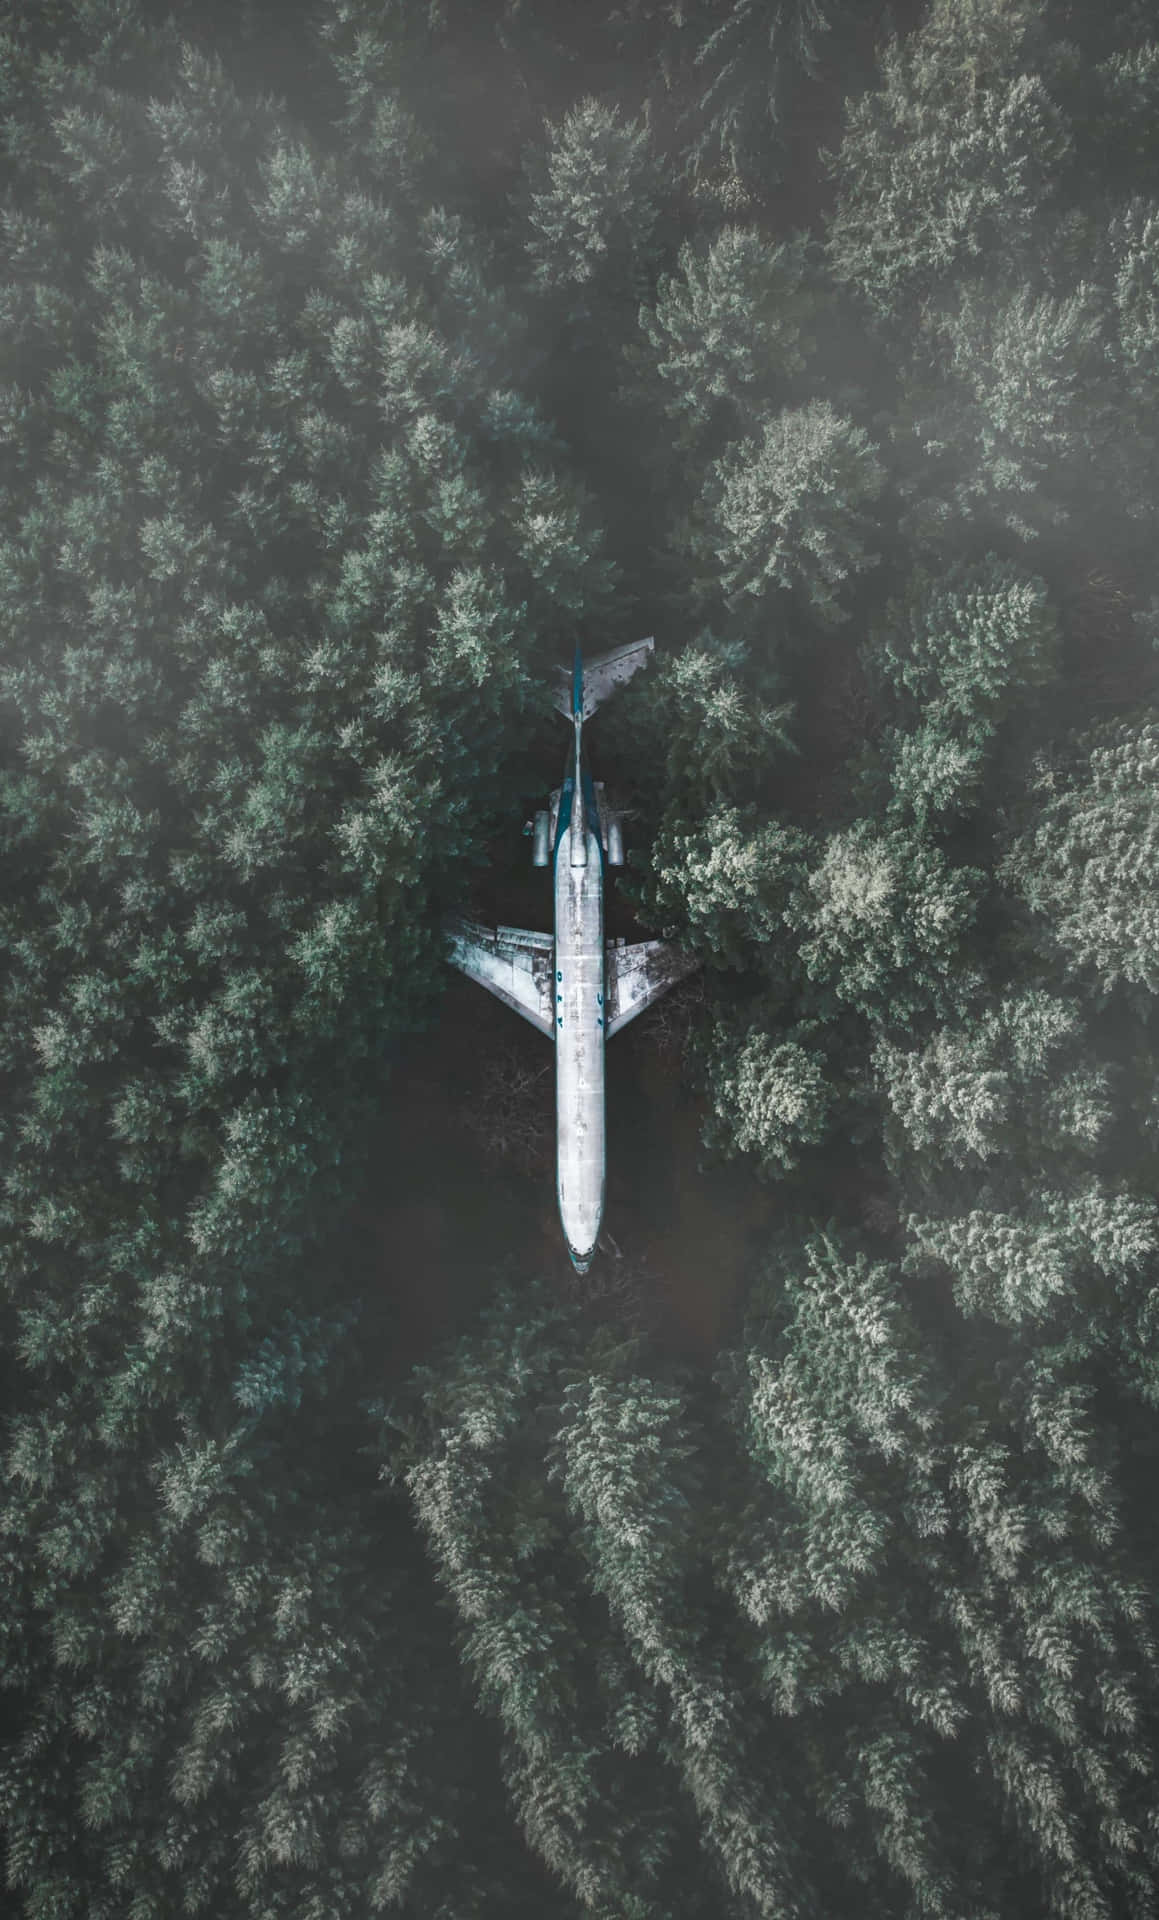 A plane taking off from the runway Wallpaper